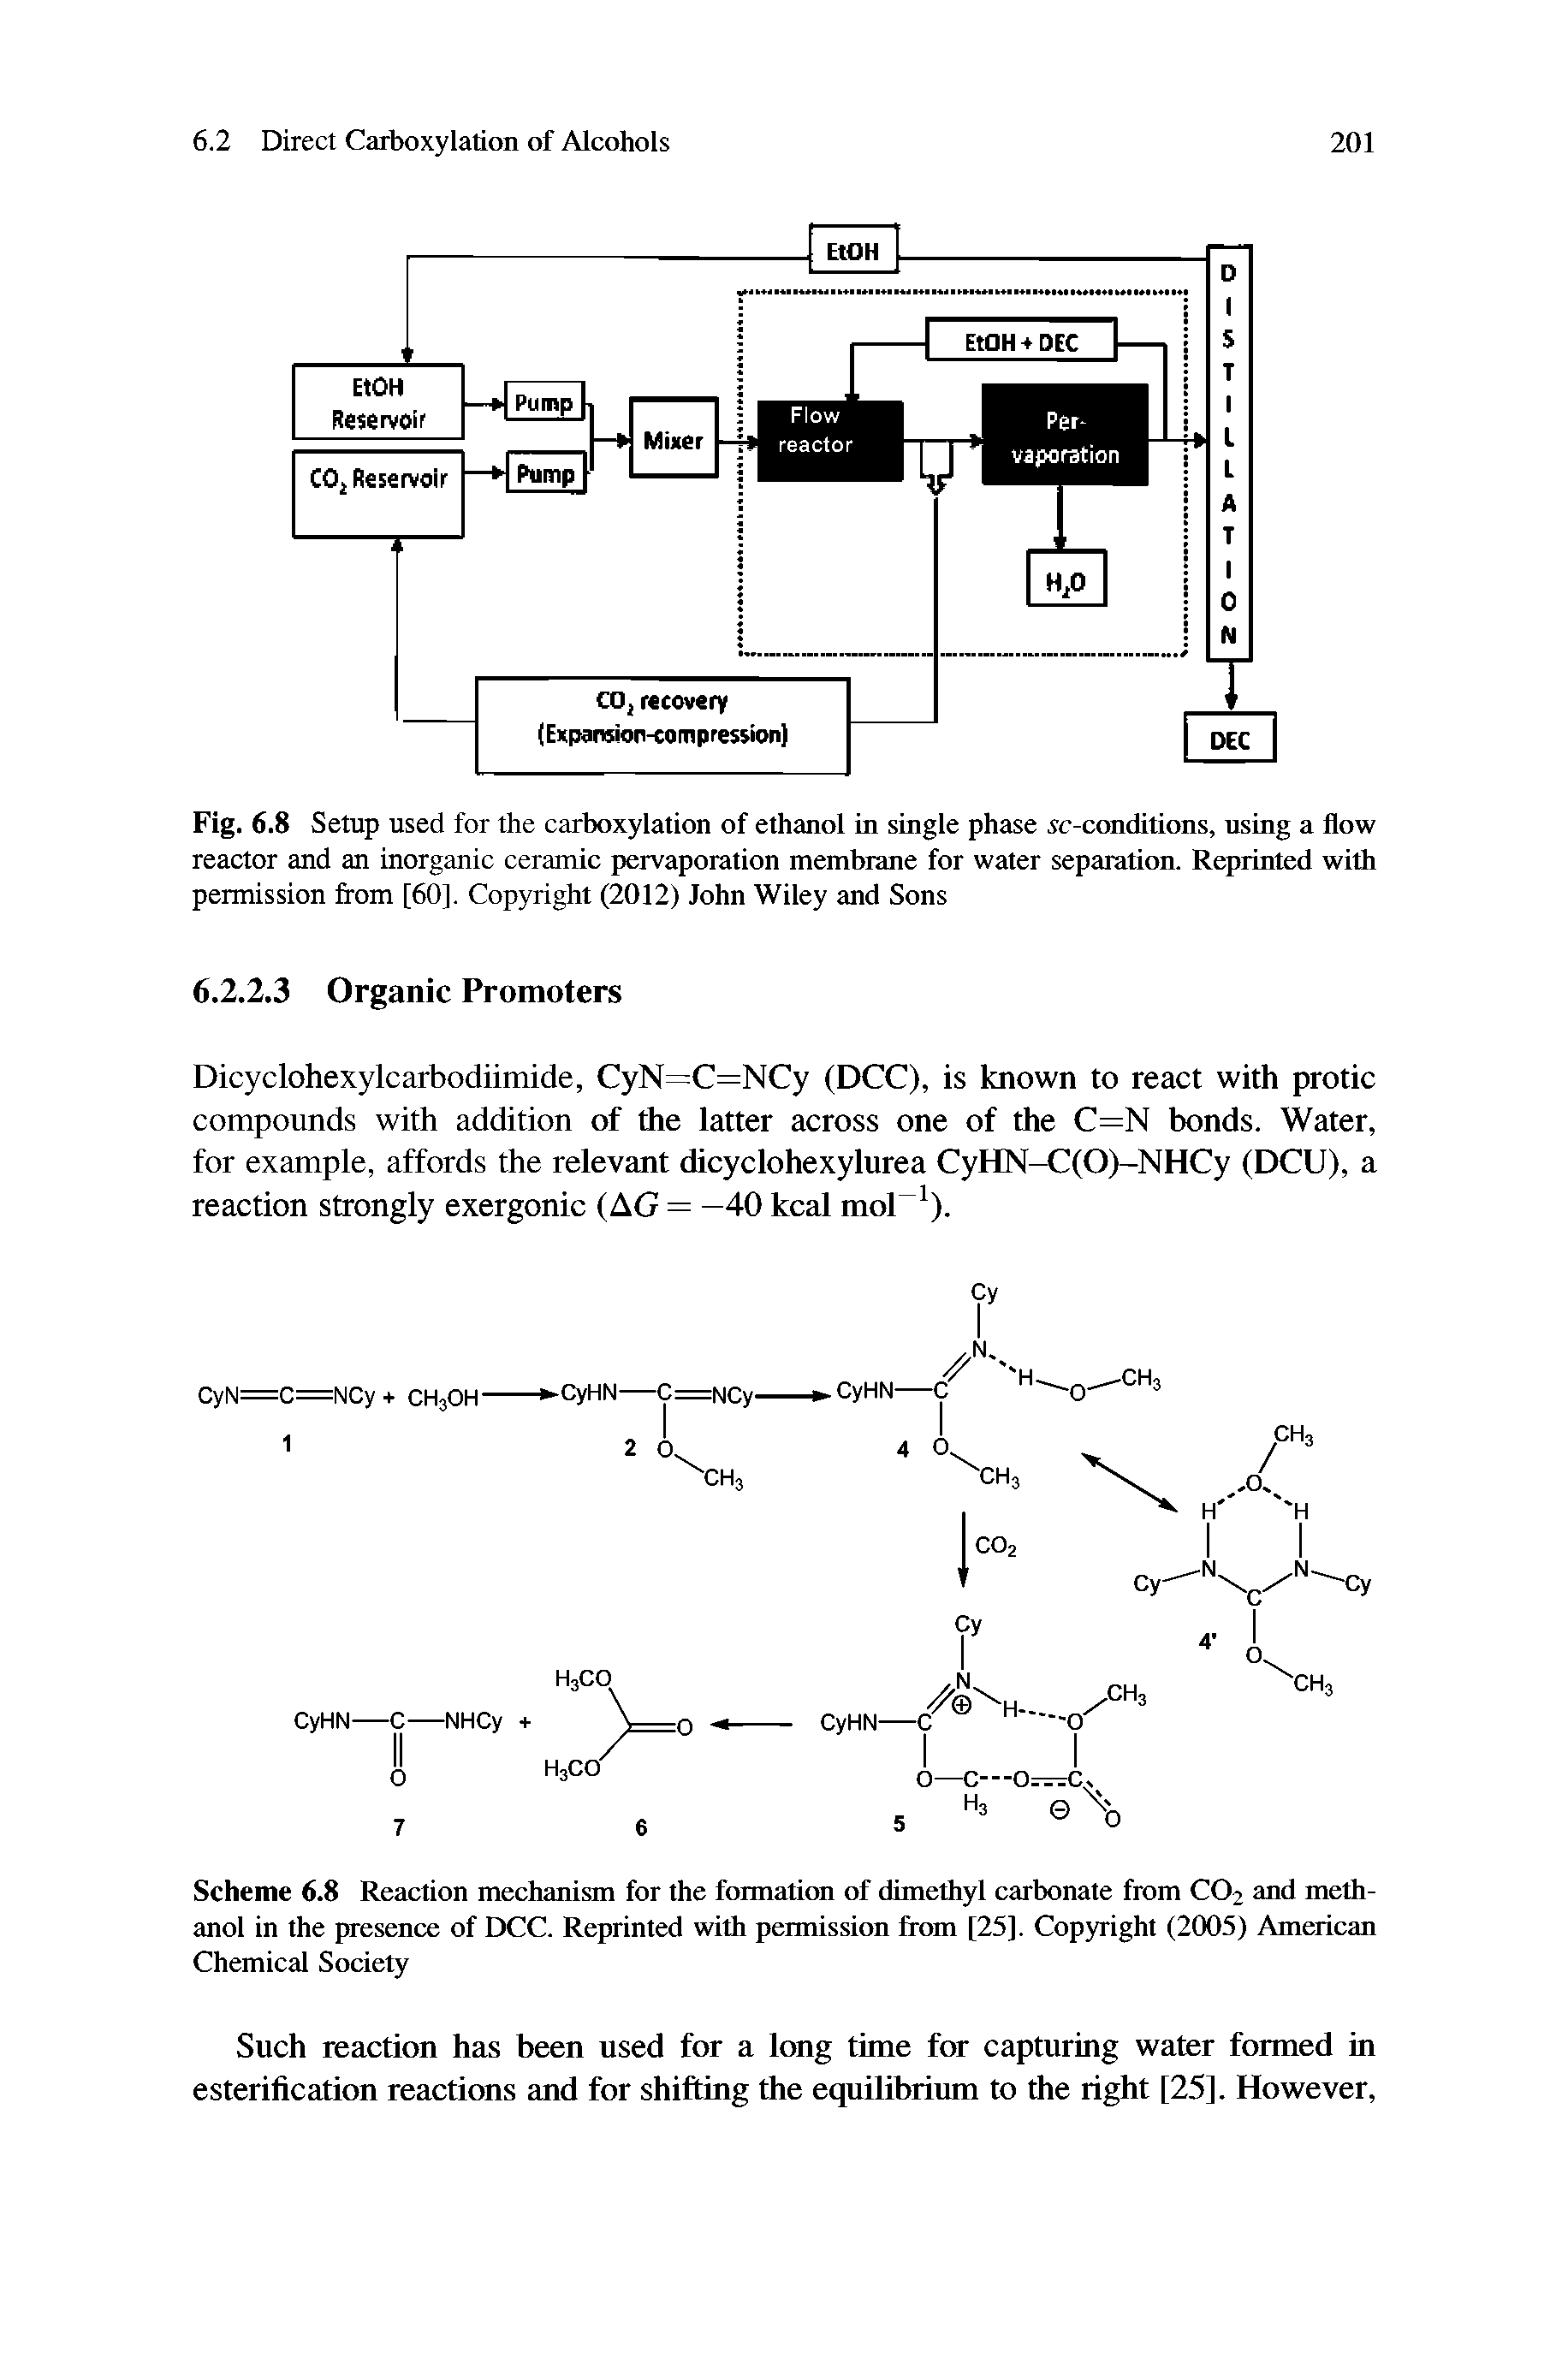 Fig. 6.8 Setup used for the carboxylation of ethanol in single phase sc-conditions, using a flow reactor and an inorganic ceramic pervaporation membrane for water separation. Reprinted with permission from [60]. Copyright (2012) John Wiley and Sons...